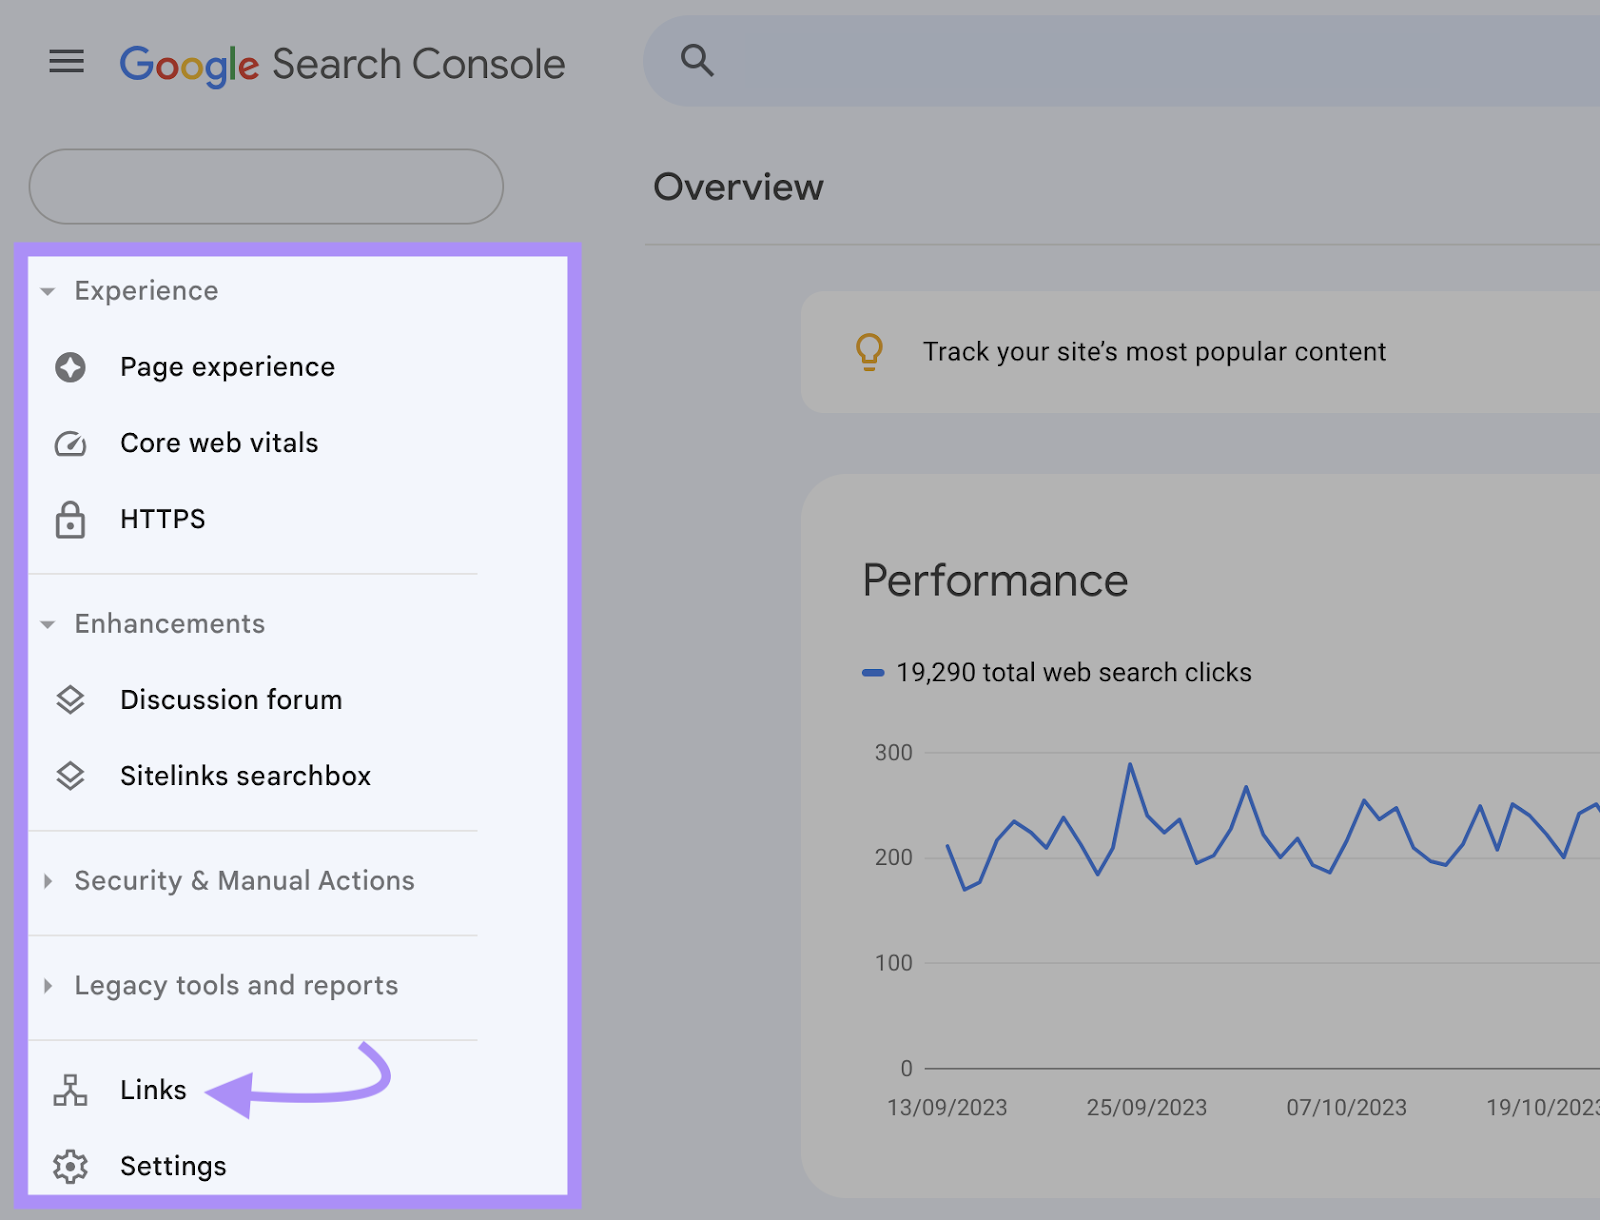 Navigating to “Links” in Google Search Console